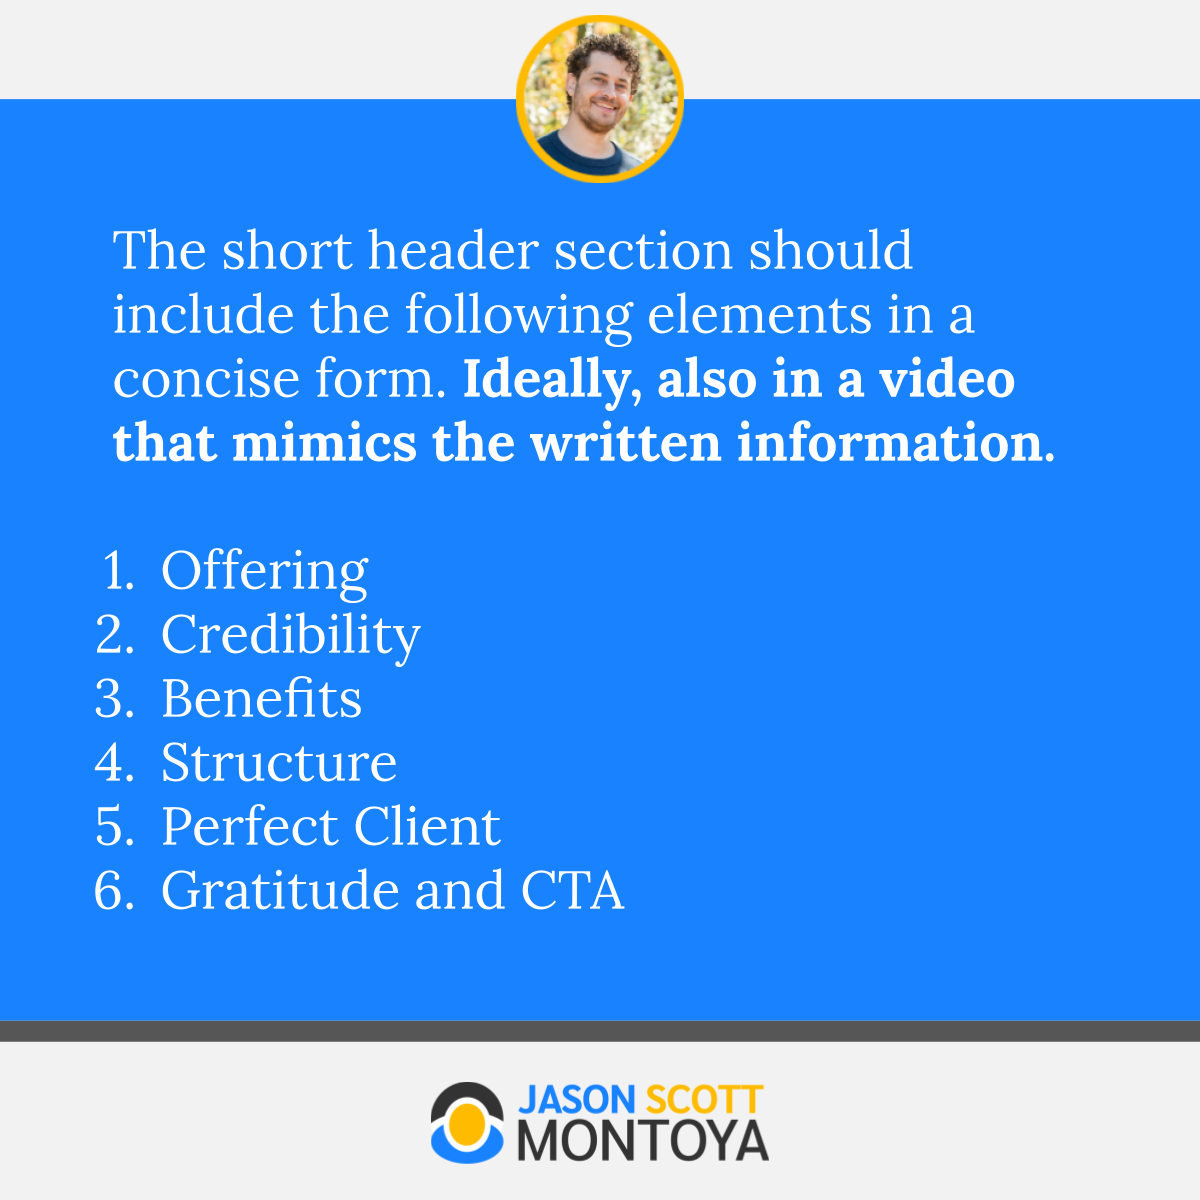 The short header section should include the following elements in a concise form. Ideally, also in a video that mimics the written information.  Offering  Credibility Benefits Structure Perfect Client Gratitude and CTA